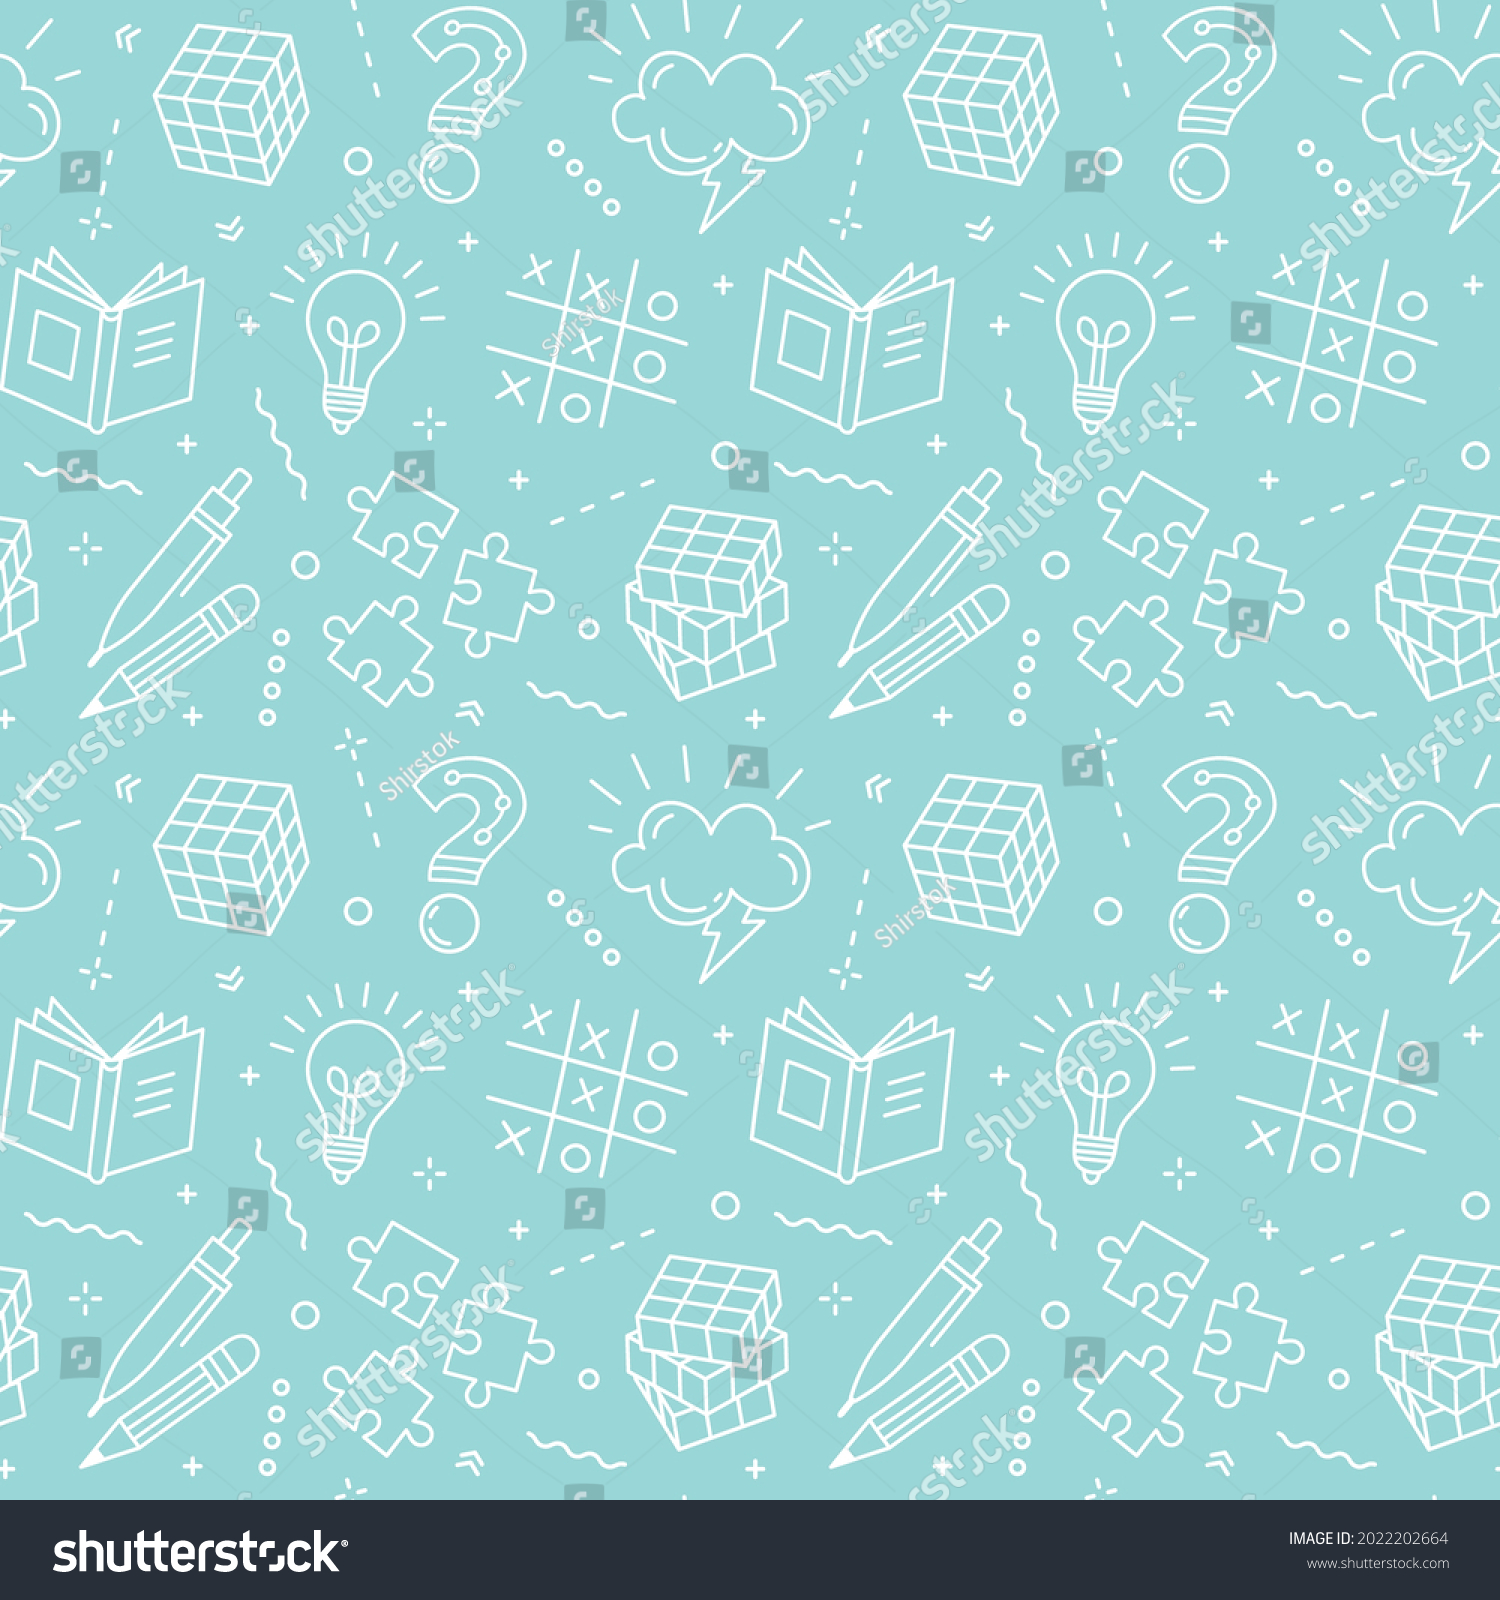 SVG of Seamless colorful vector  pattern with puzzle, competition in answering quiz and intellectual game elements. Intelligence or intellect contest backdrop, brainstorm svg